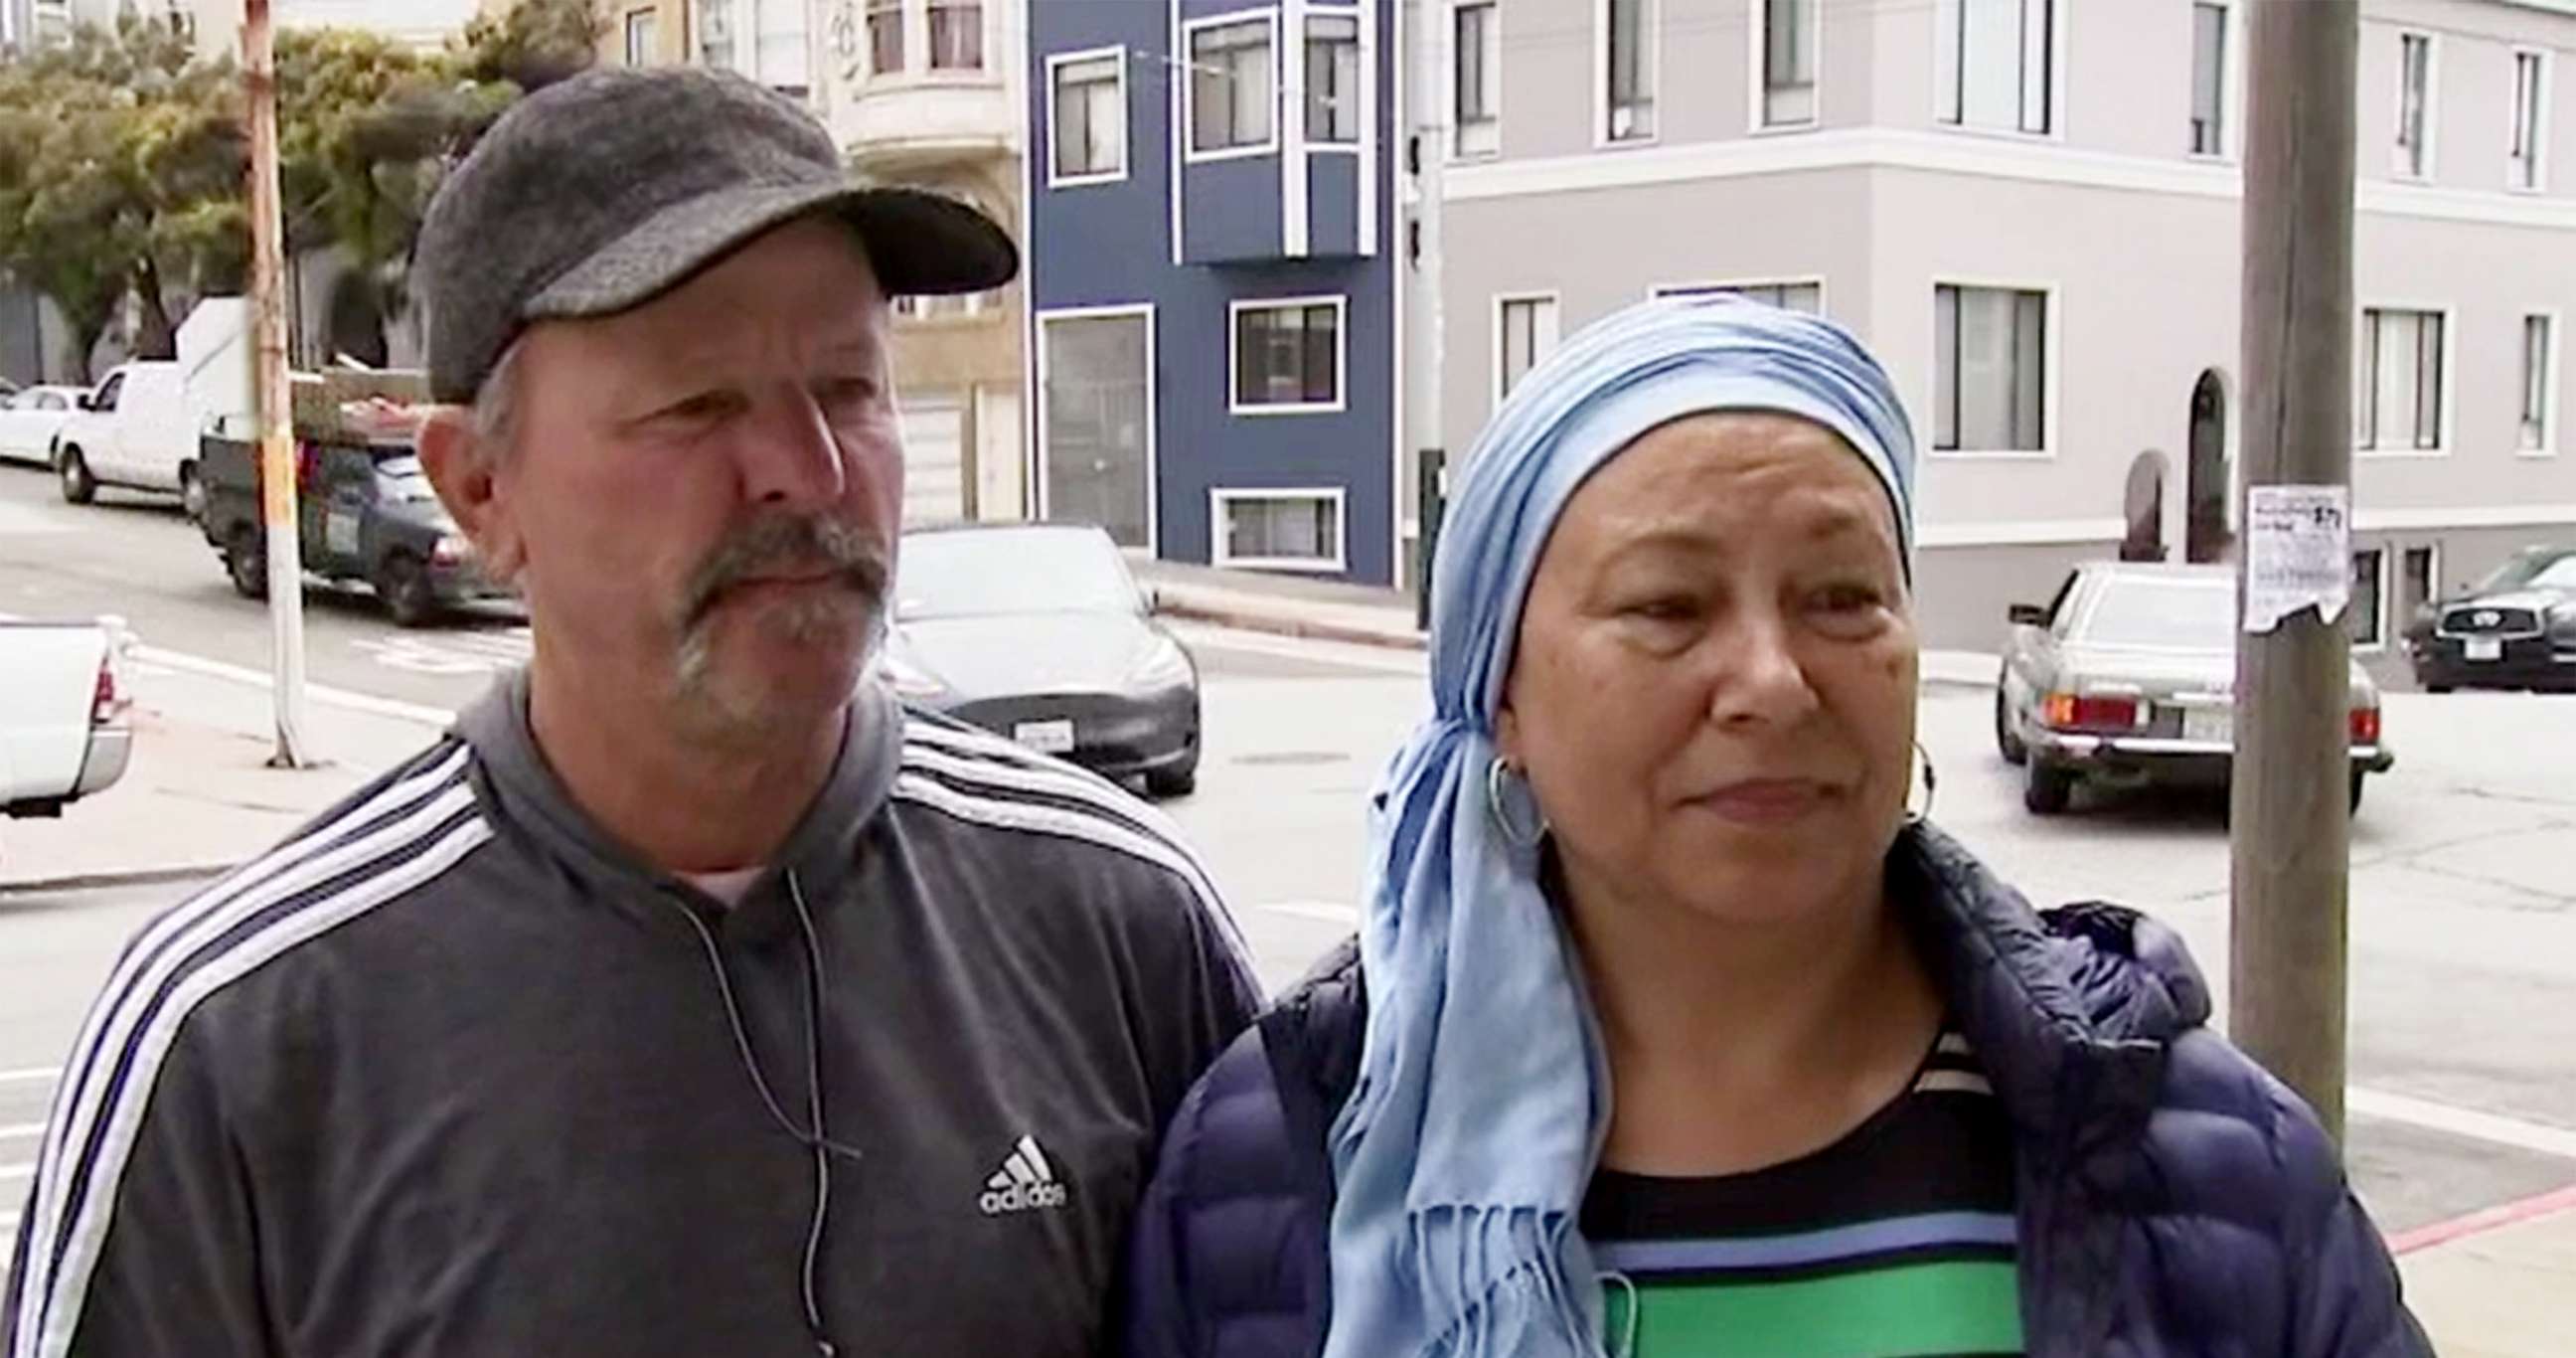 PHOTO: Jeff and Desiree Jolly are interviewed about receiving a parking ticket after curb was repainted while their car was parked in San Francisco, July 26, 2022.